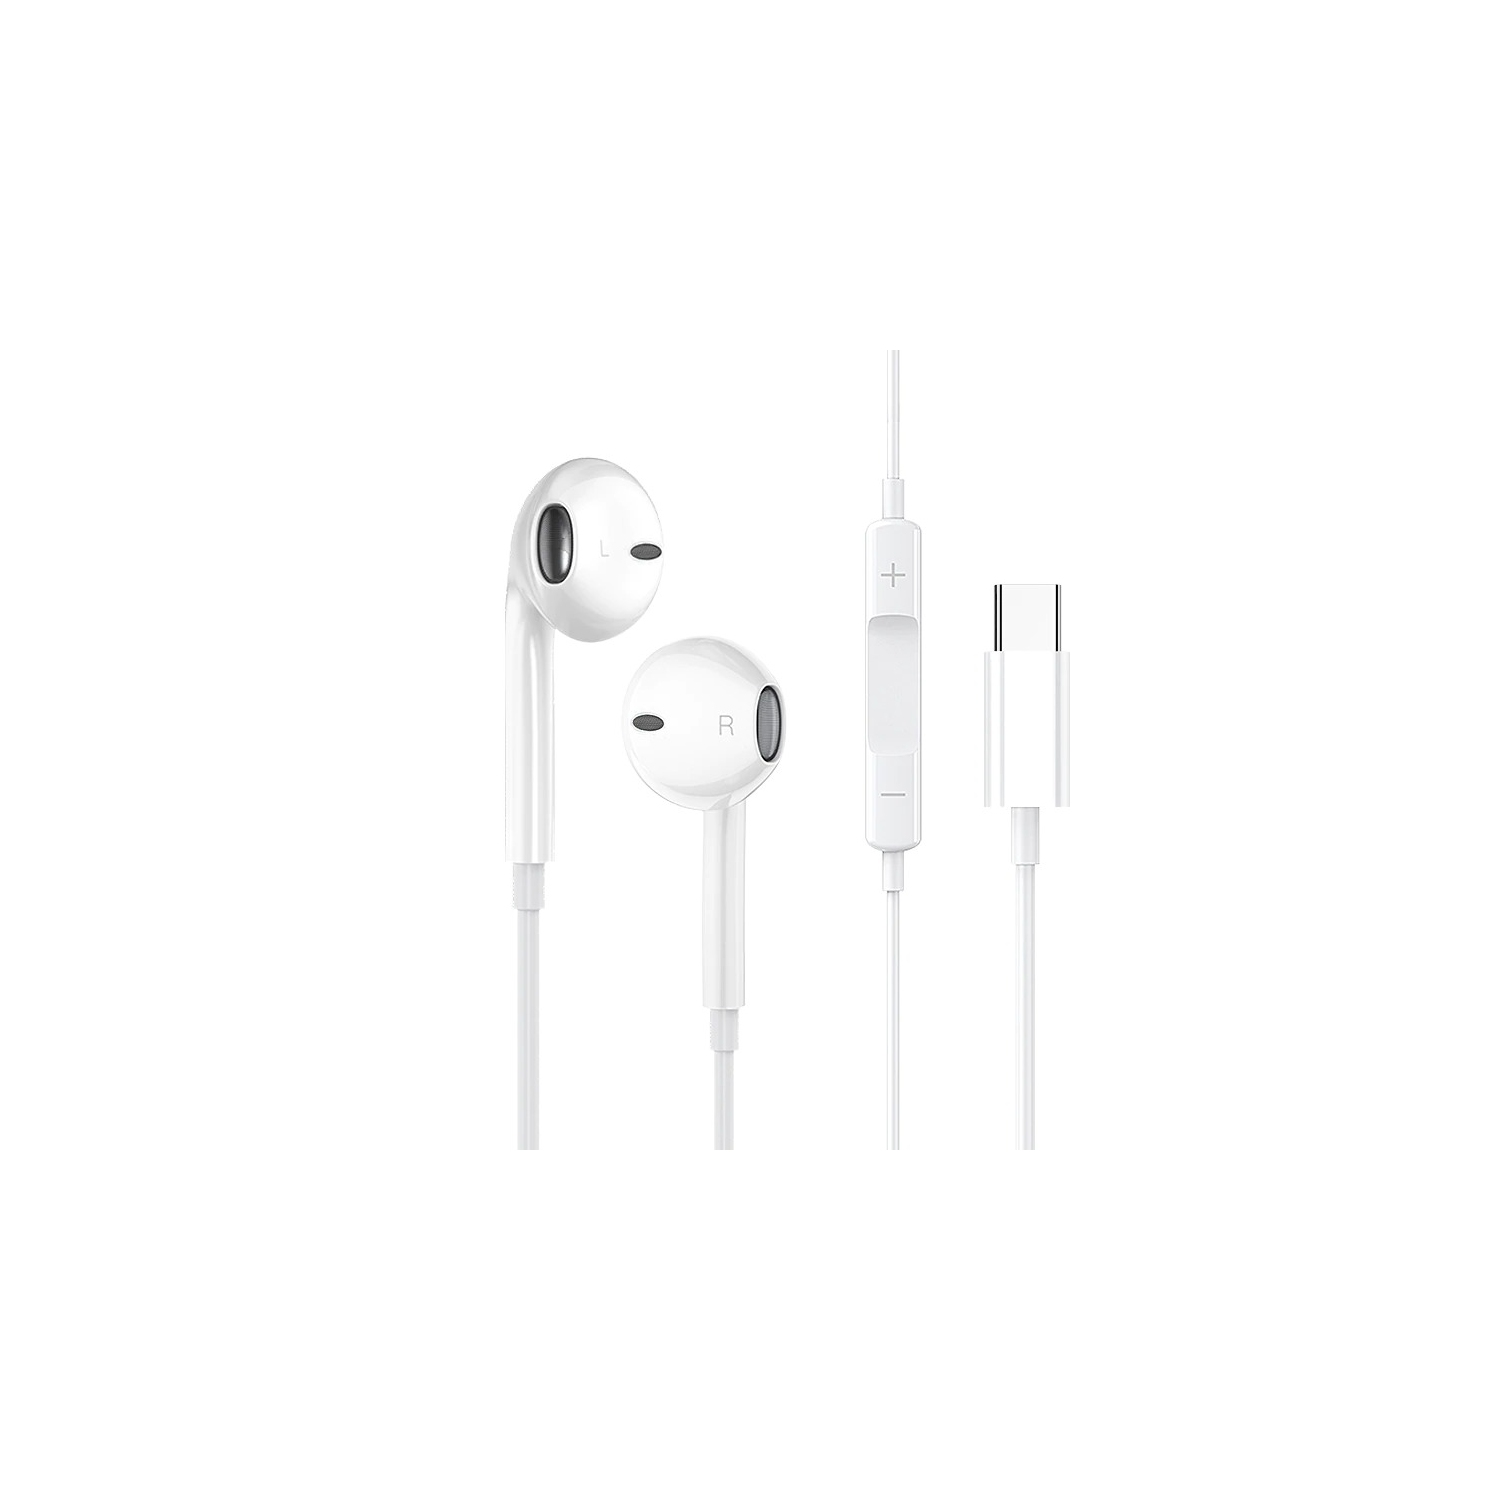 SuperShield Type C USB-C Earphones Headphones Headsets with Mic Volume Control for Huawei LG Google Samsung S8 S9 S10 Plus S20 S21 FE S22 Ultra Note, White